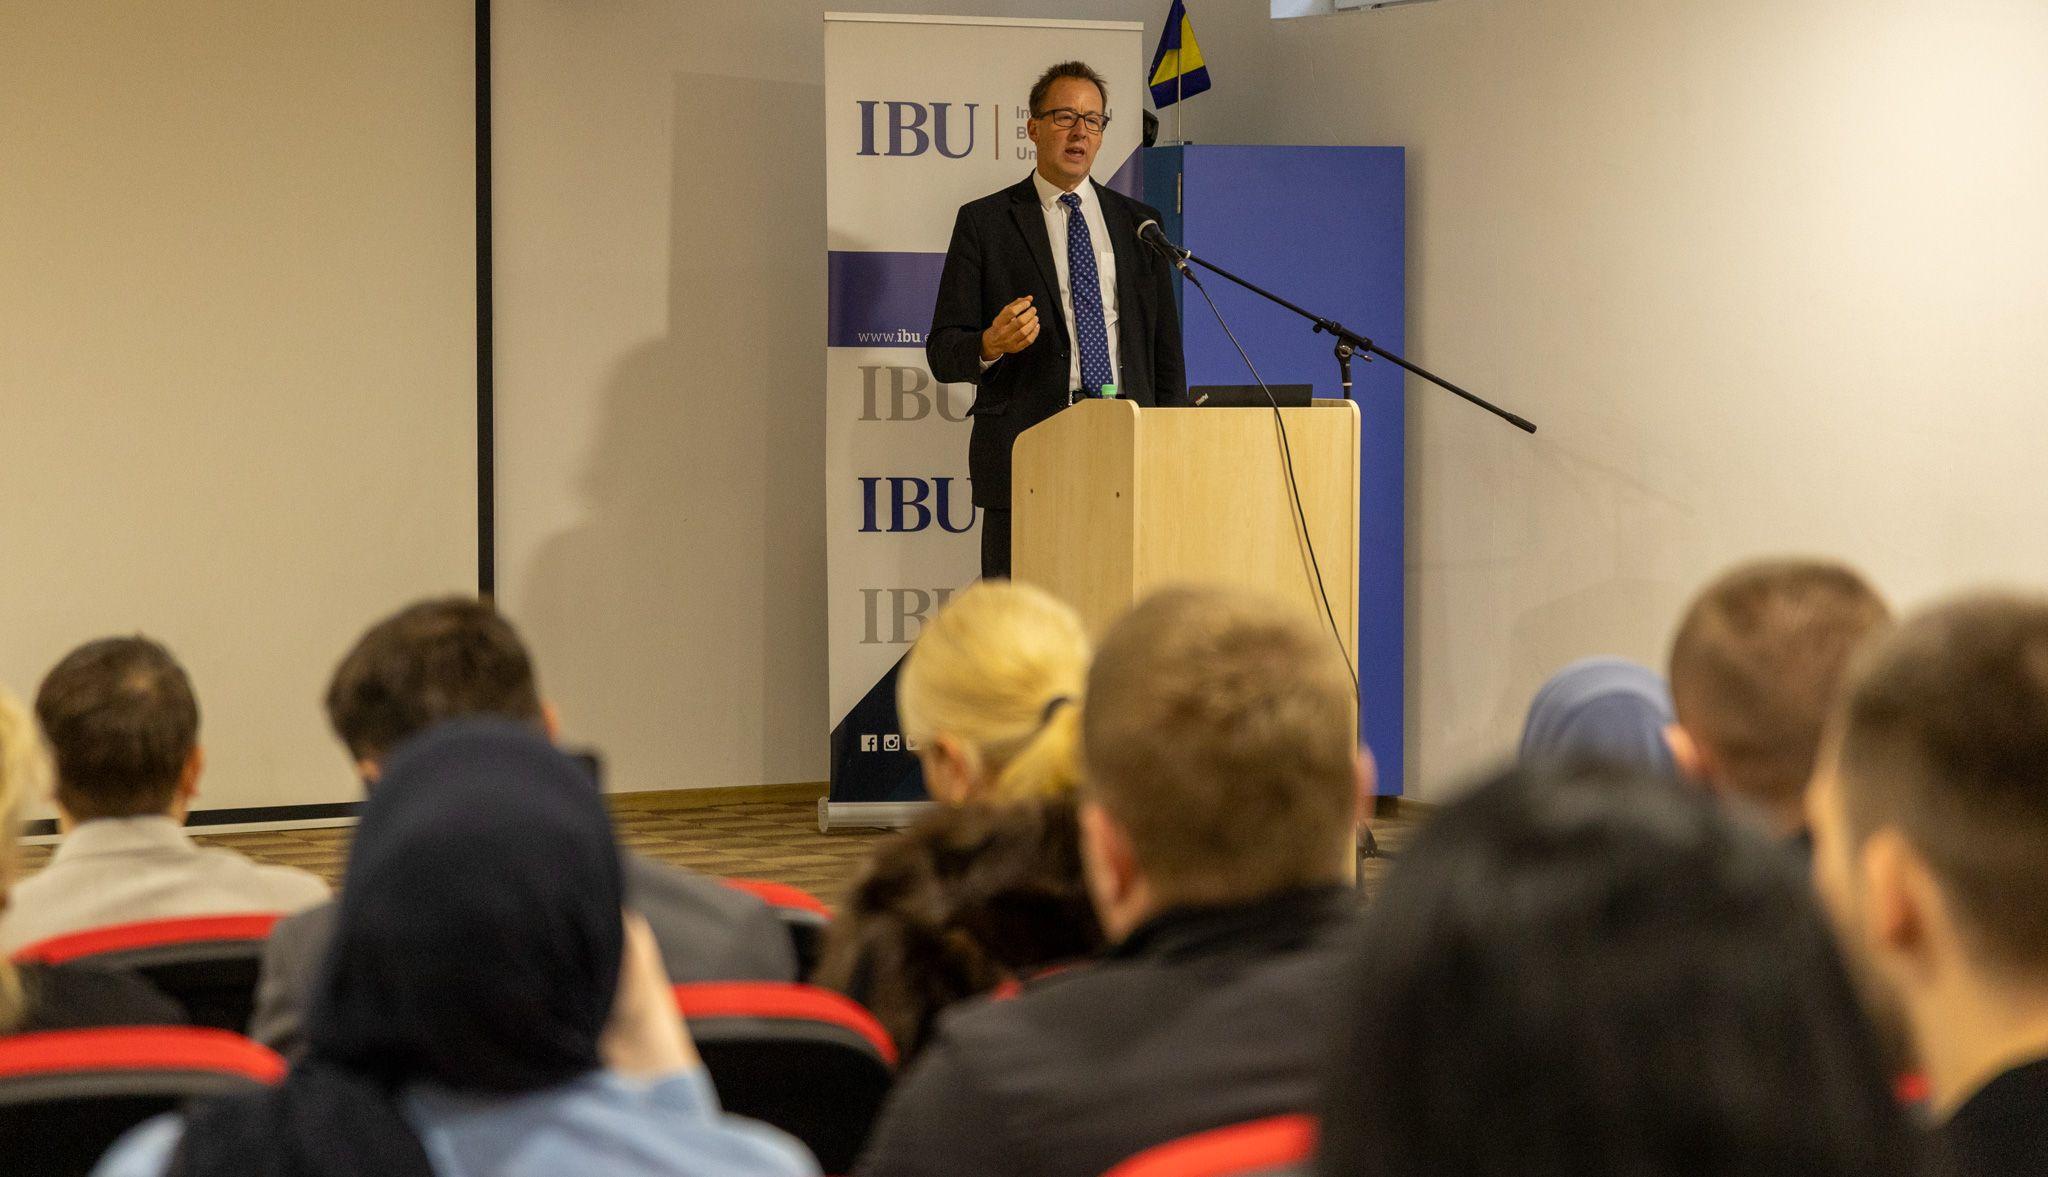 HM Trade Commissioner Chris Barton Delivers Insightful Lecture on UK-EU Trade Dynamics at International Burch University